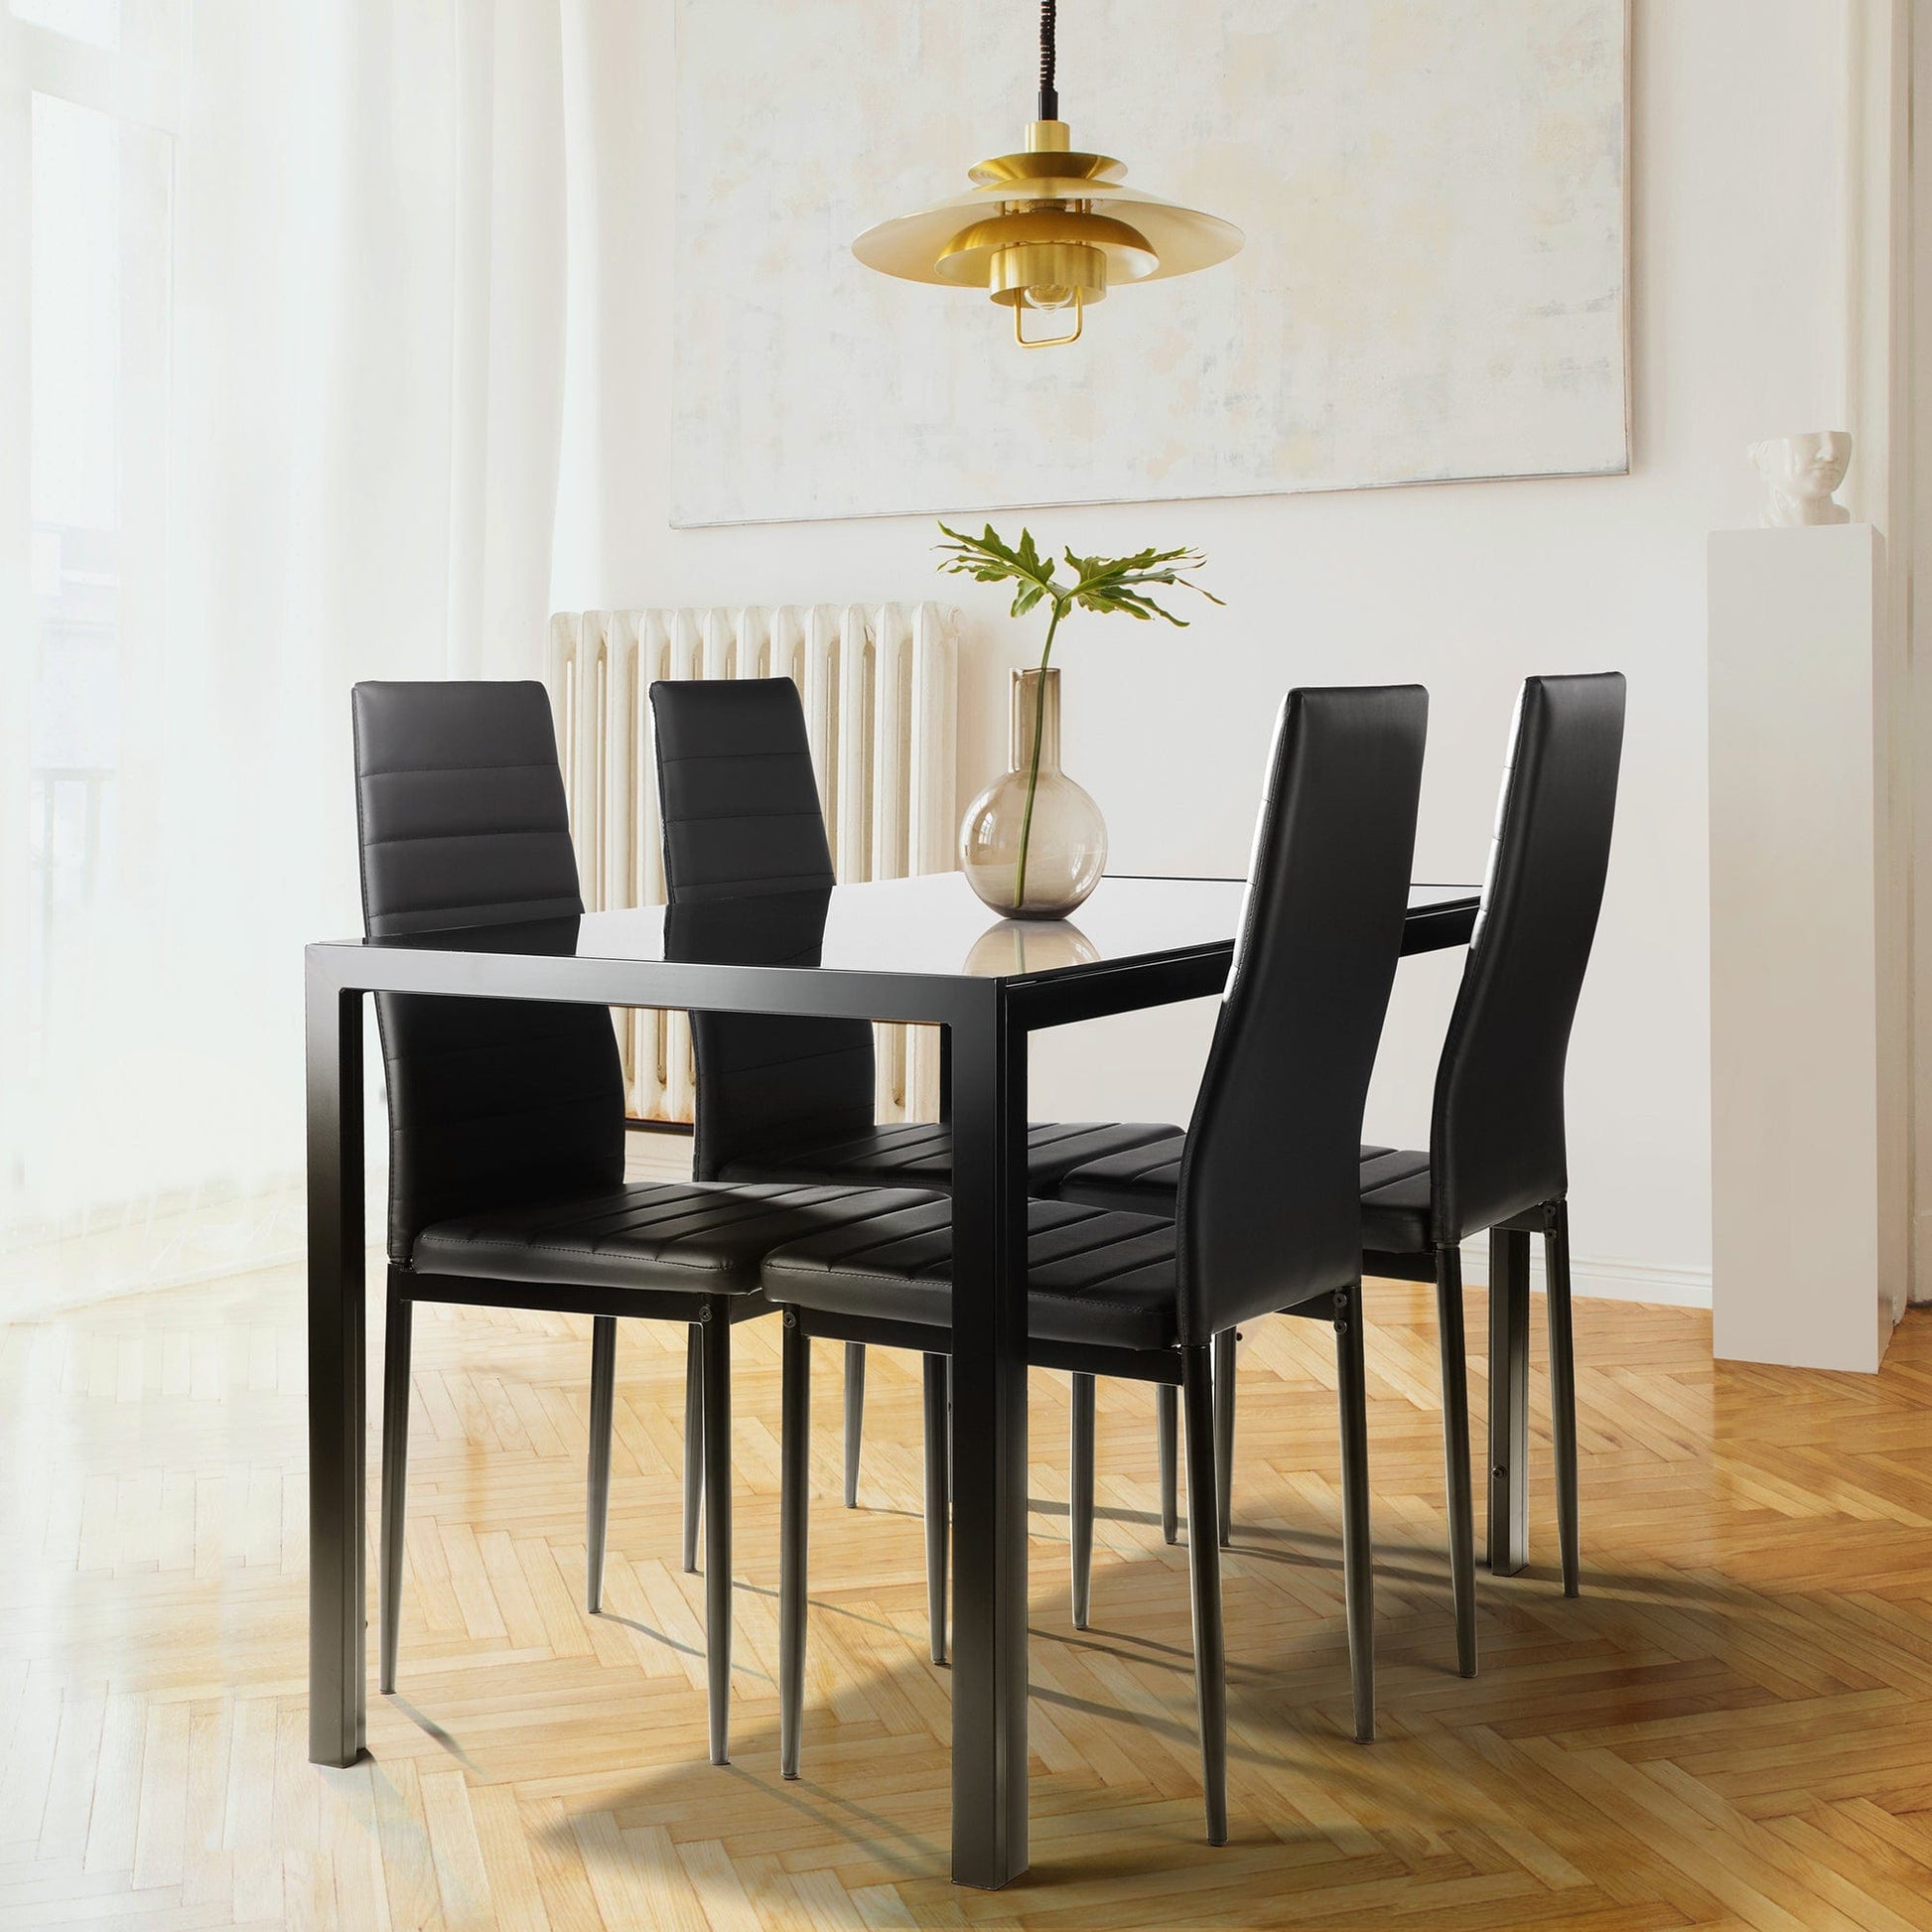 1st Choice Furniture Direct Dining Room Sets 1st Choice Contemporary Dining Room Set with Glass Table & Chairs